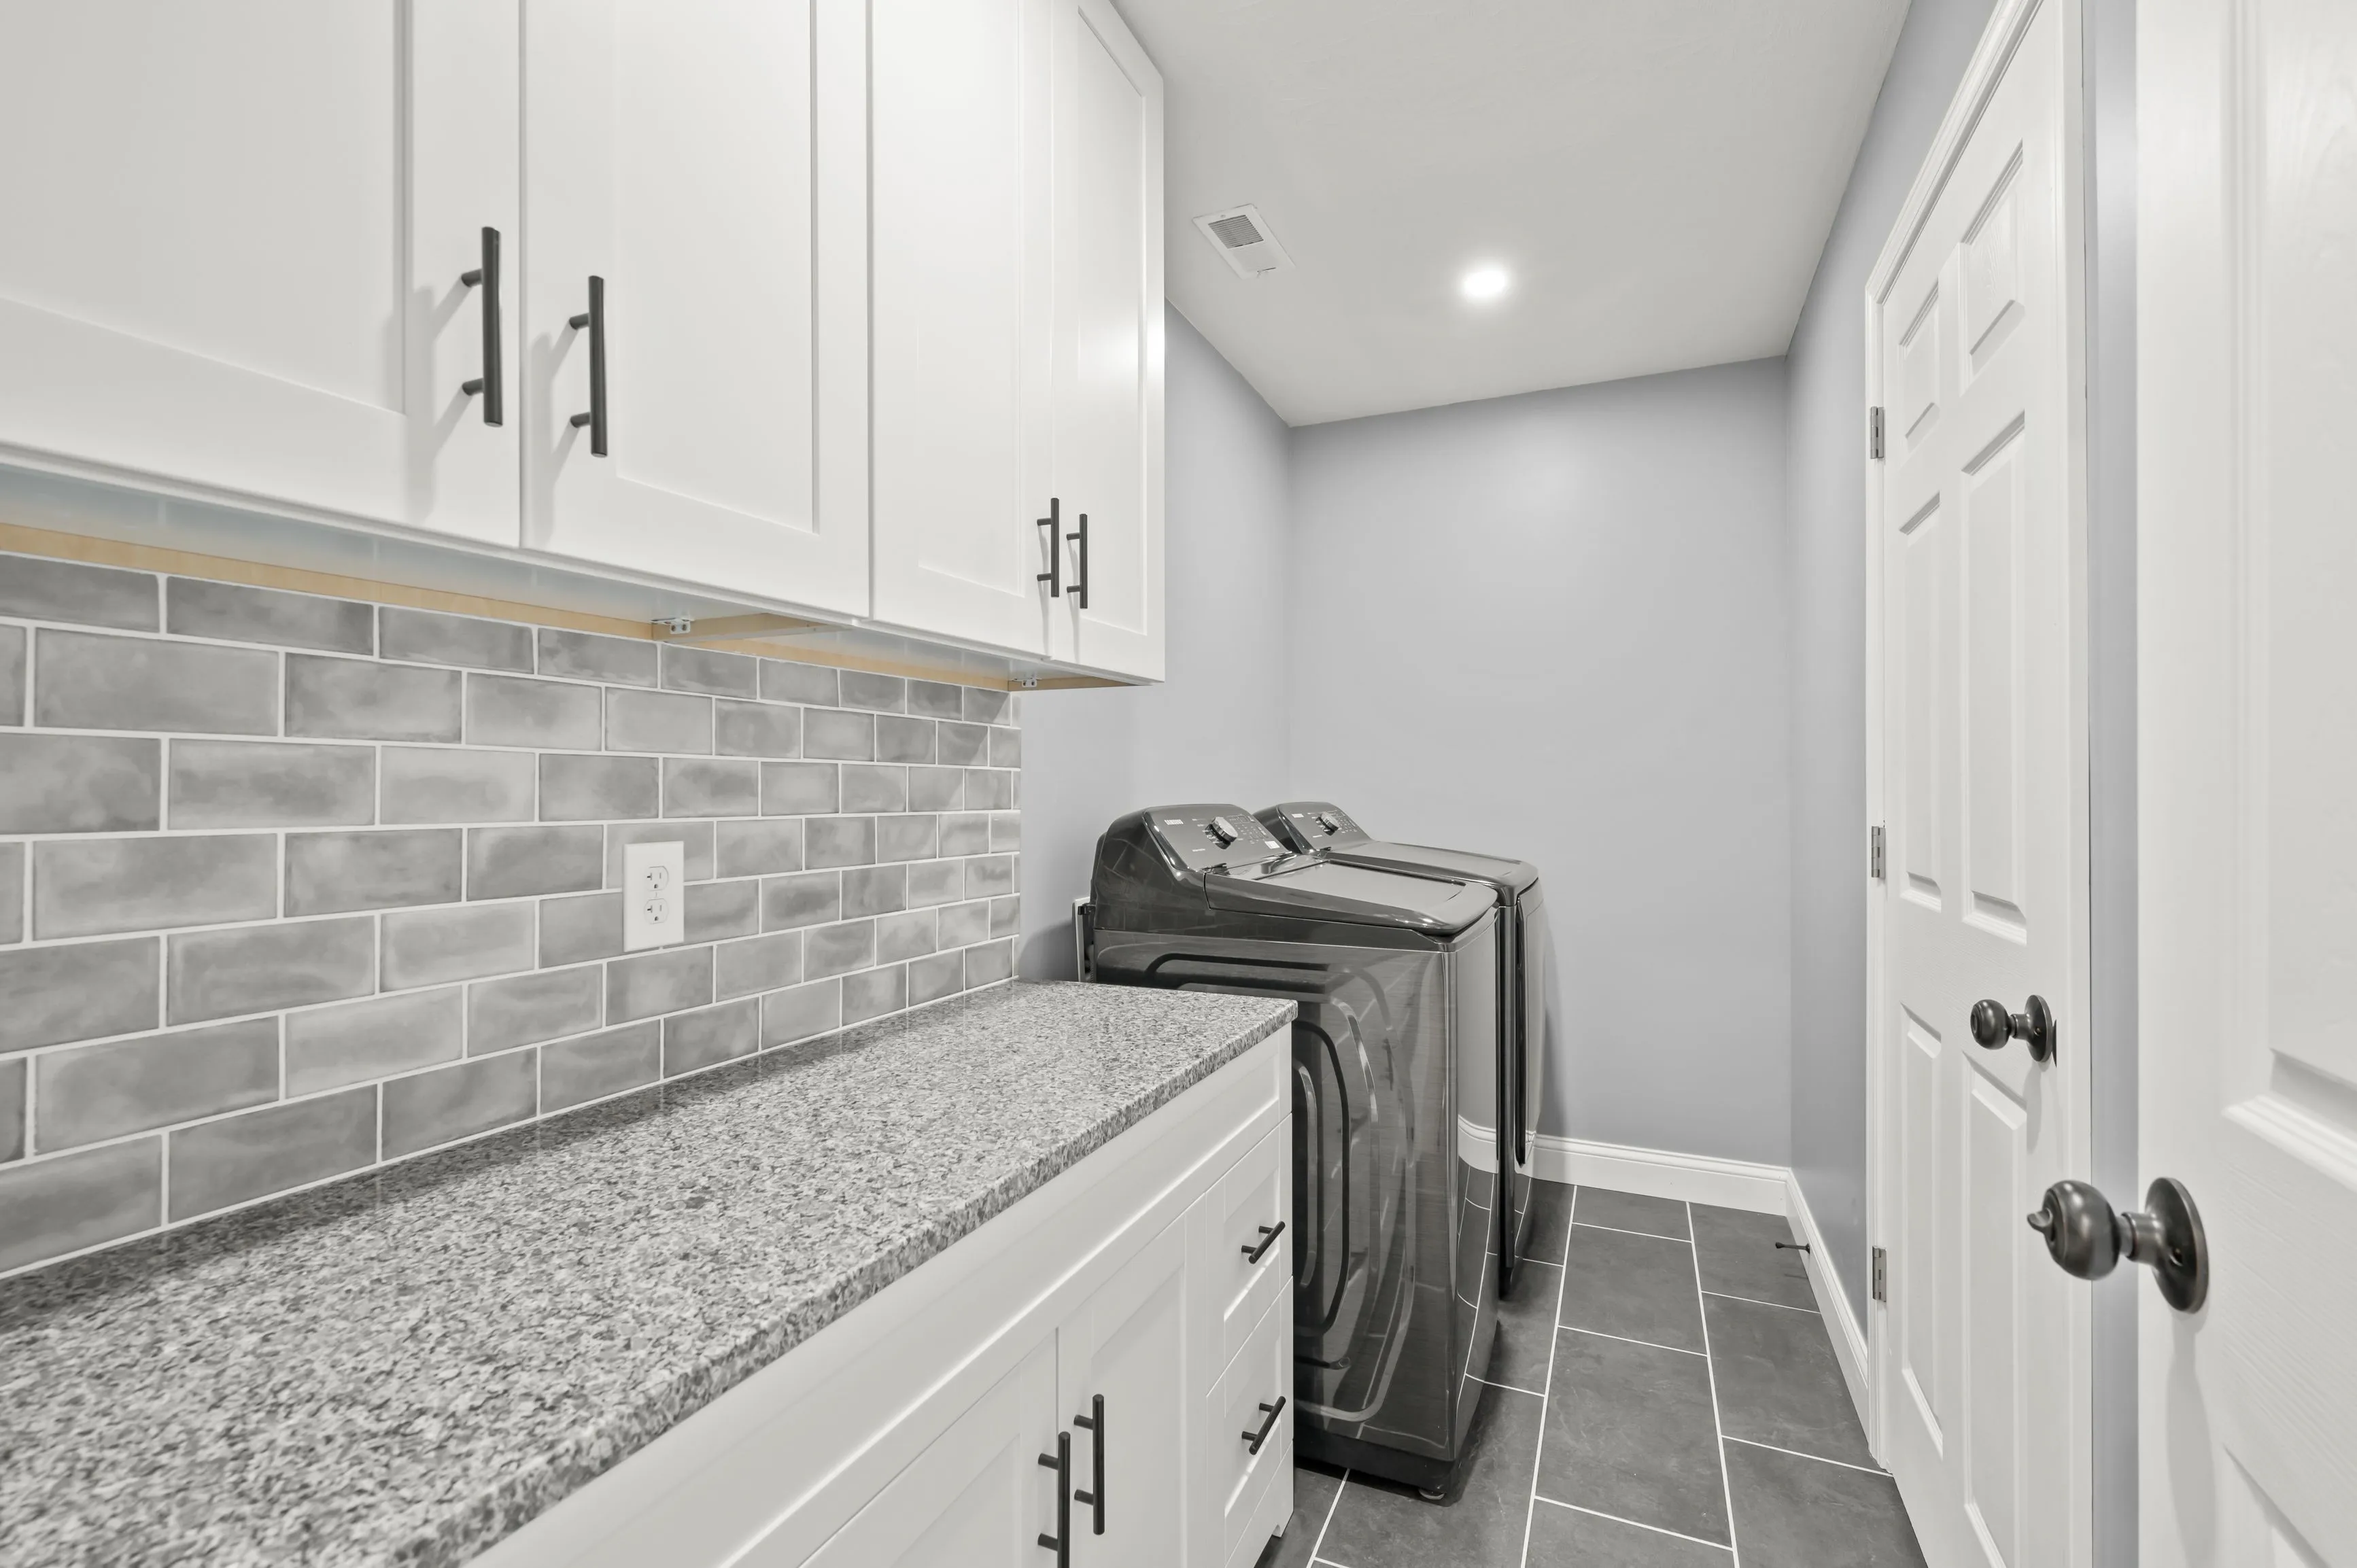 Modern laundry room with white cabinetry, gray granite countertops, gray subway tile backsplash, and black appliances.